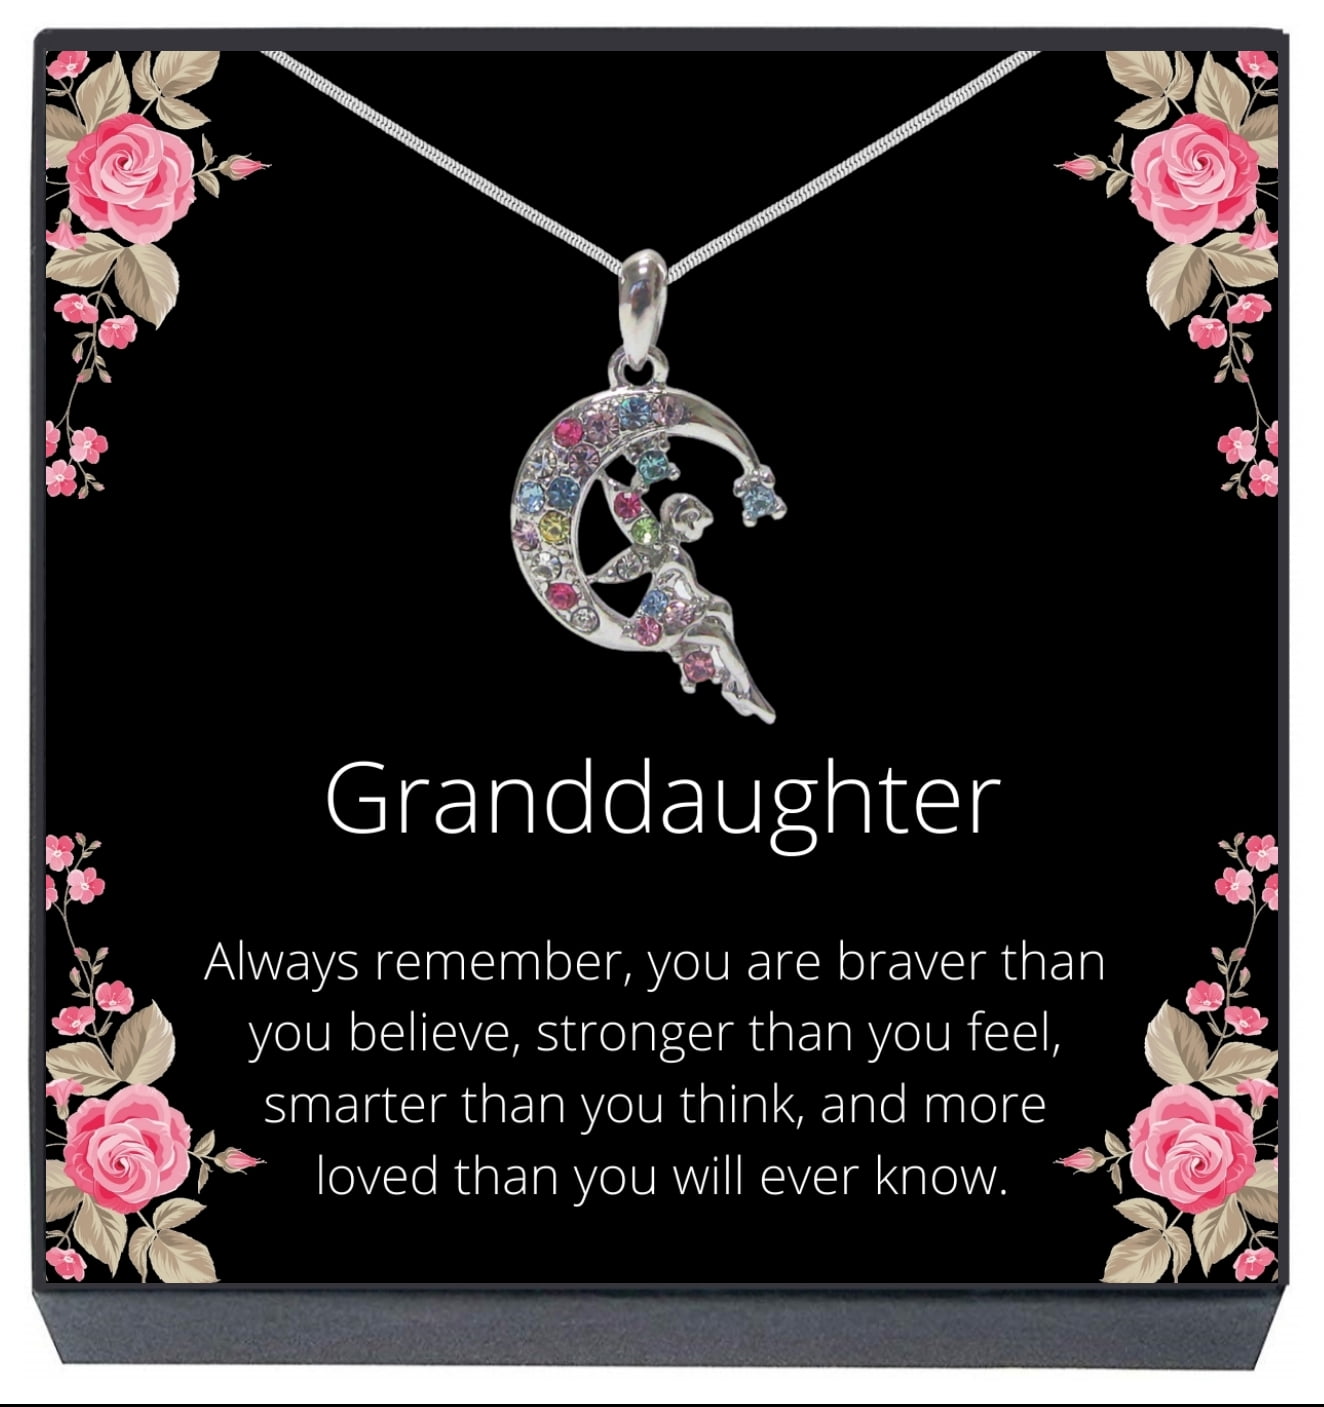 To Our Granddaughter from Grandparents Fairy Tales and Granddaughter Gift Jewelry Gift for Granddaughter Heart Pendant Necklace